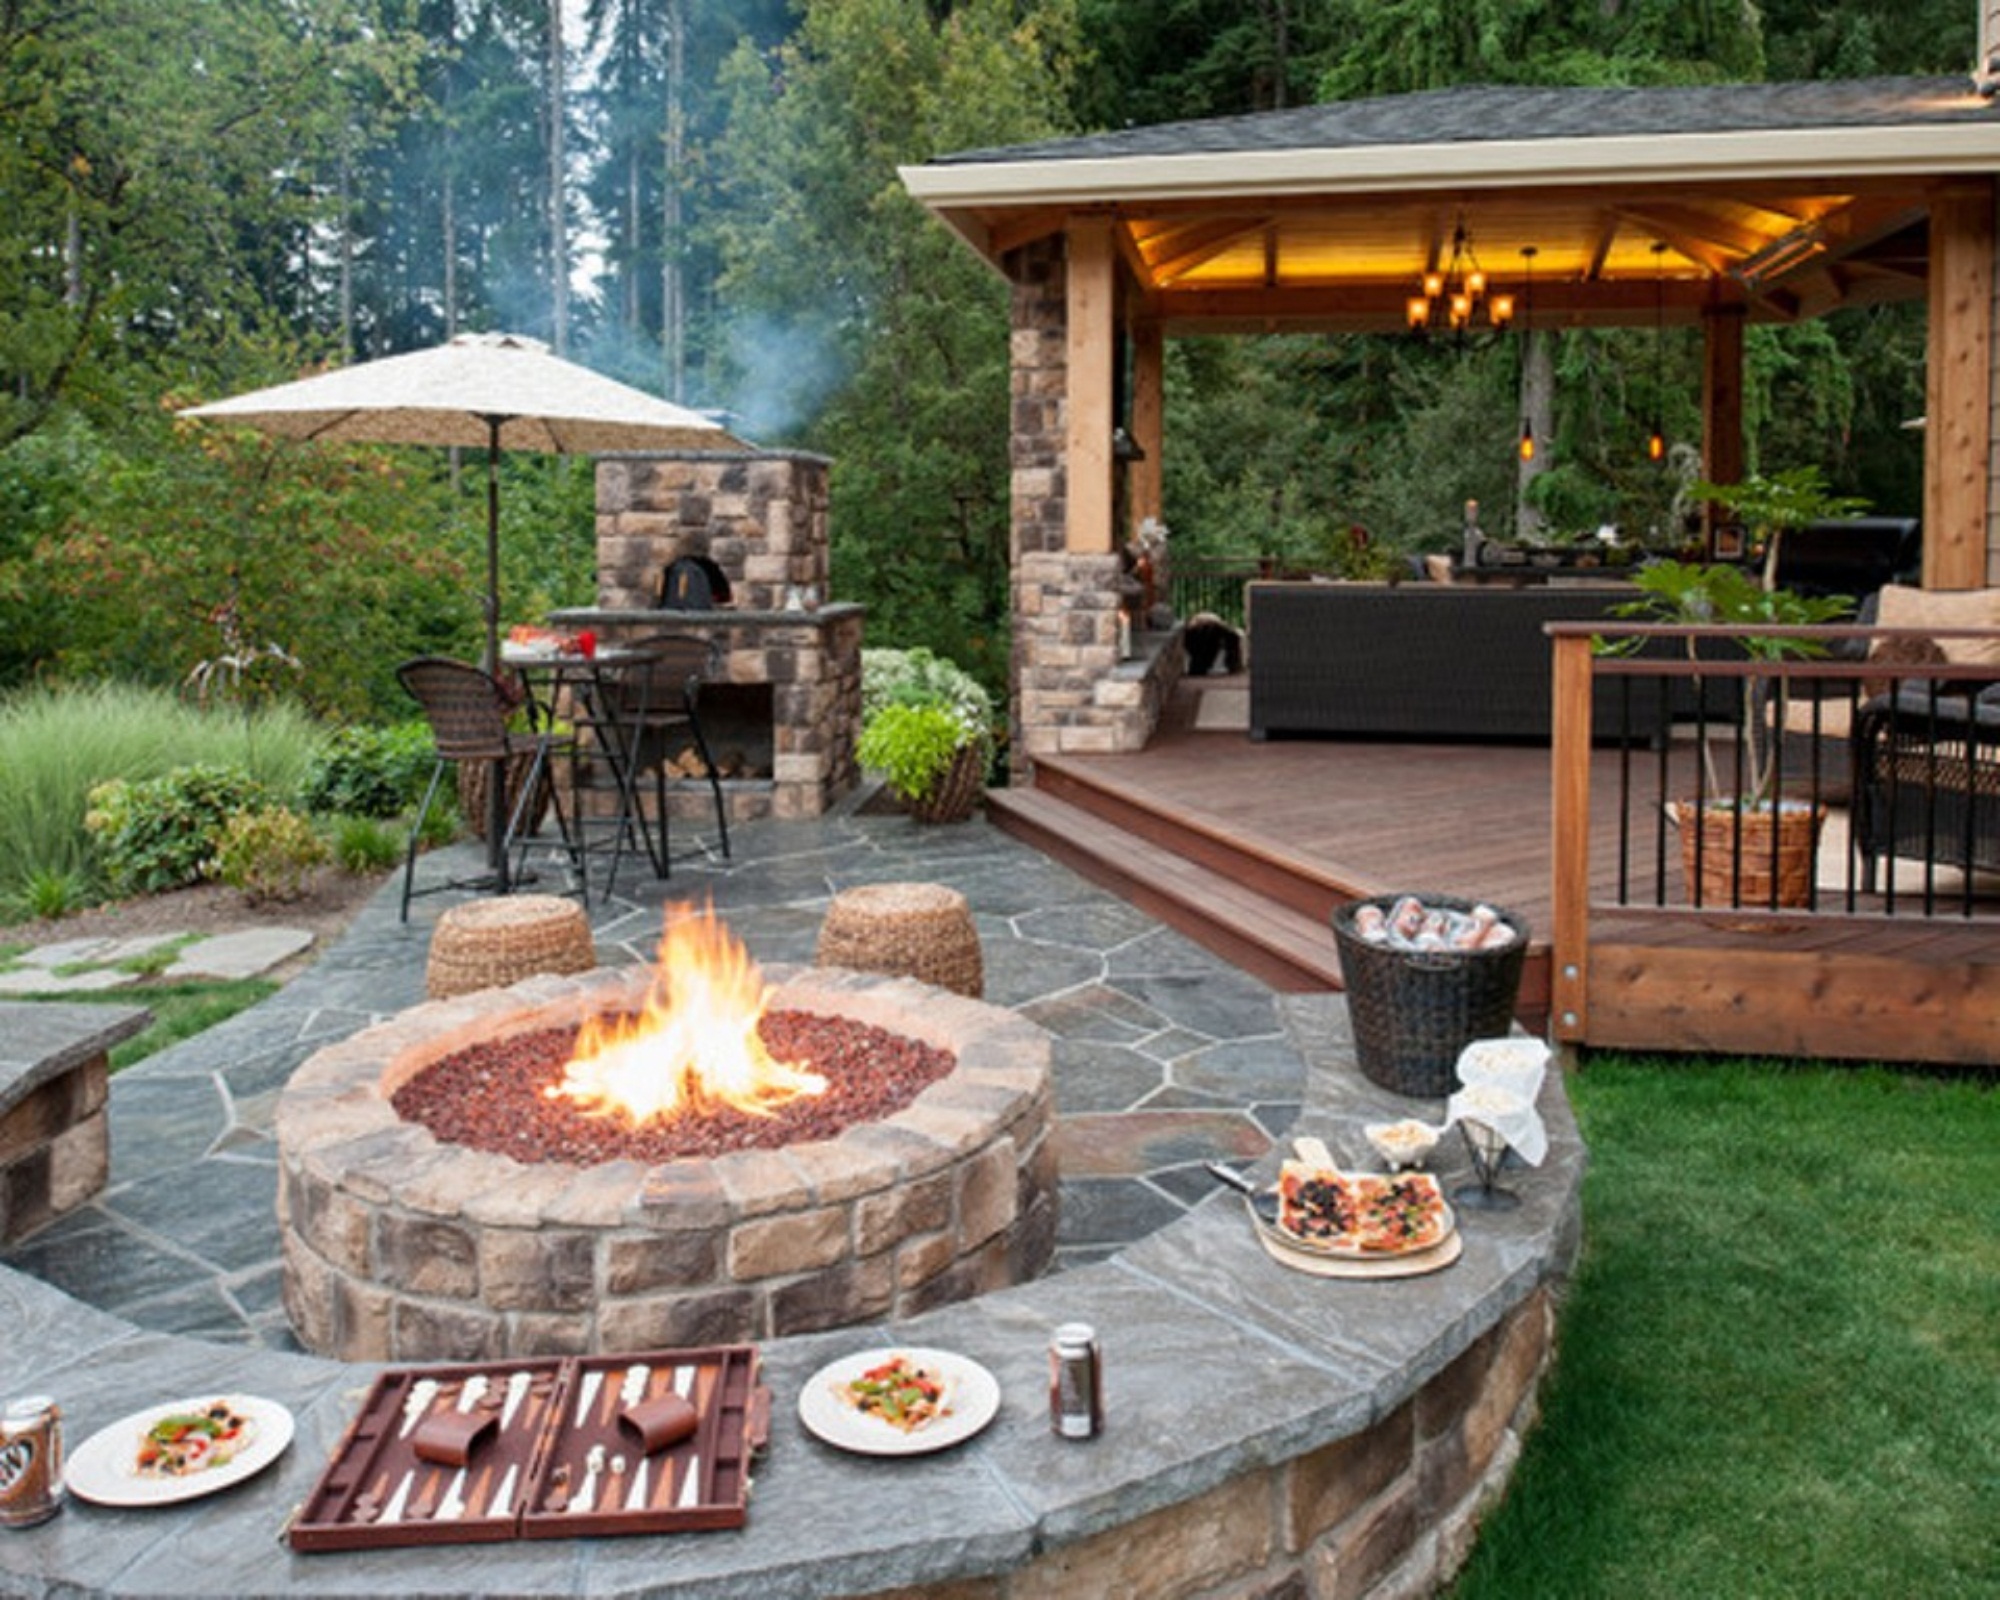 Upgrade Your Backyard with an Outdoor Kitchen